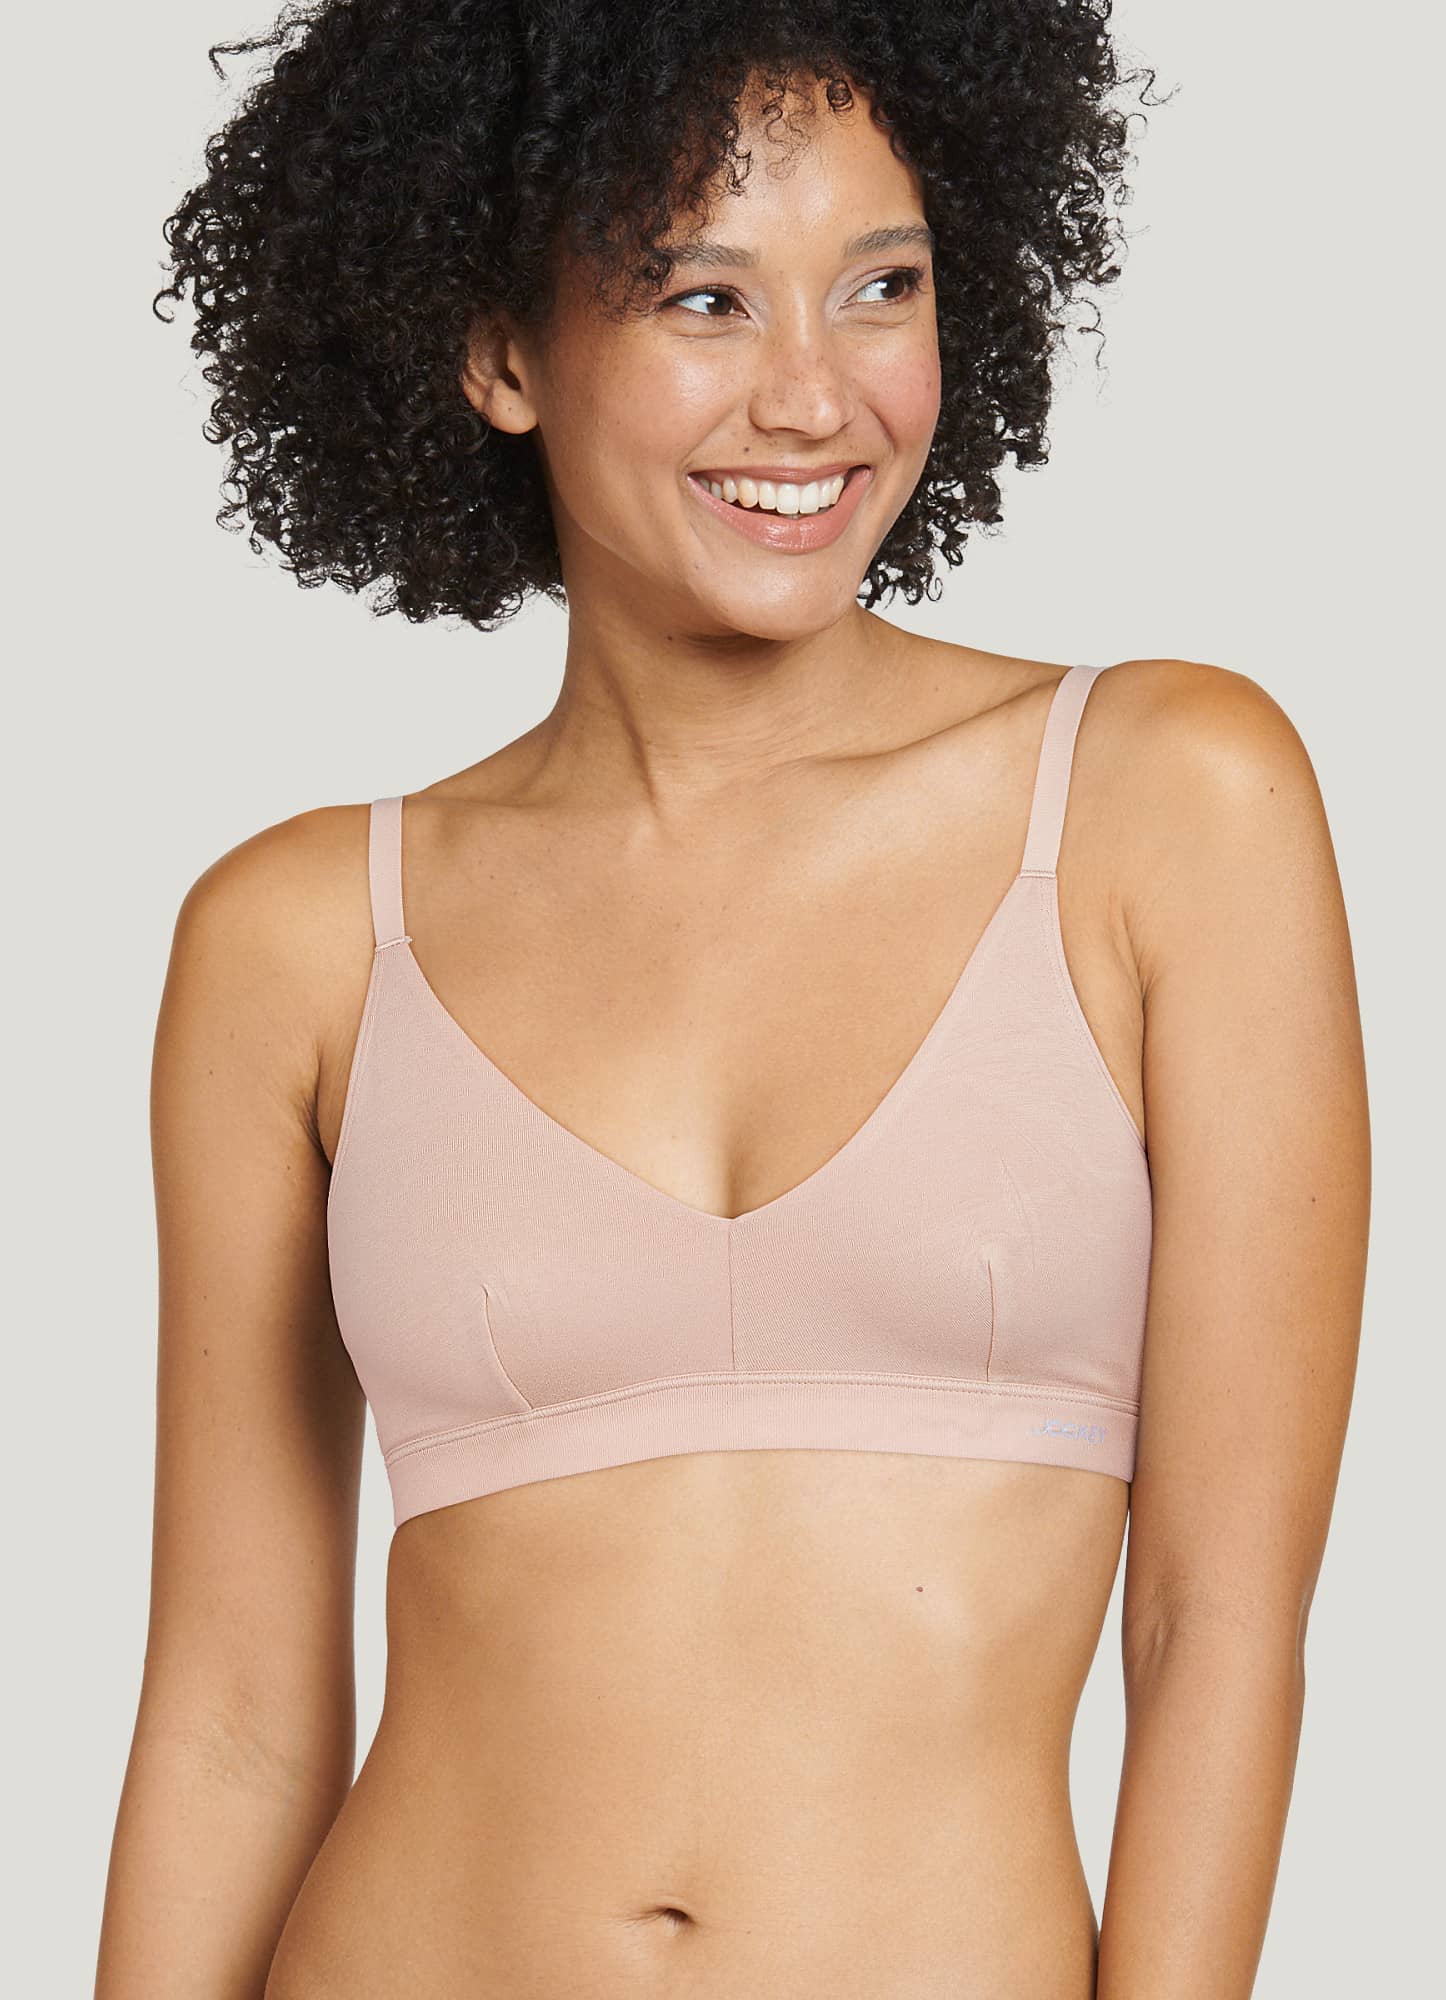 Only $16.99 Discontinued Bras Select Styles